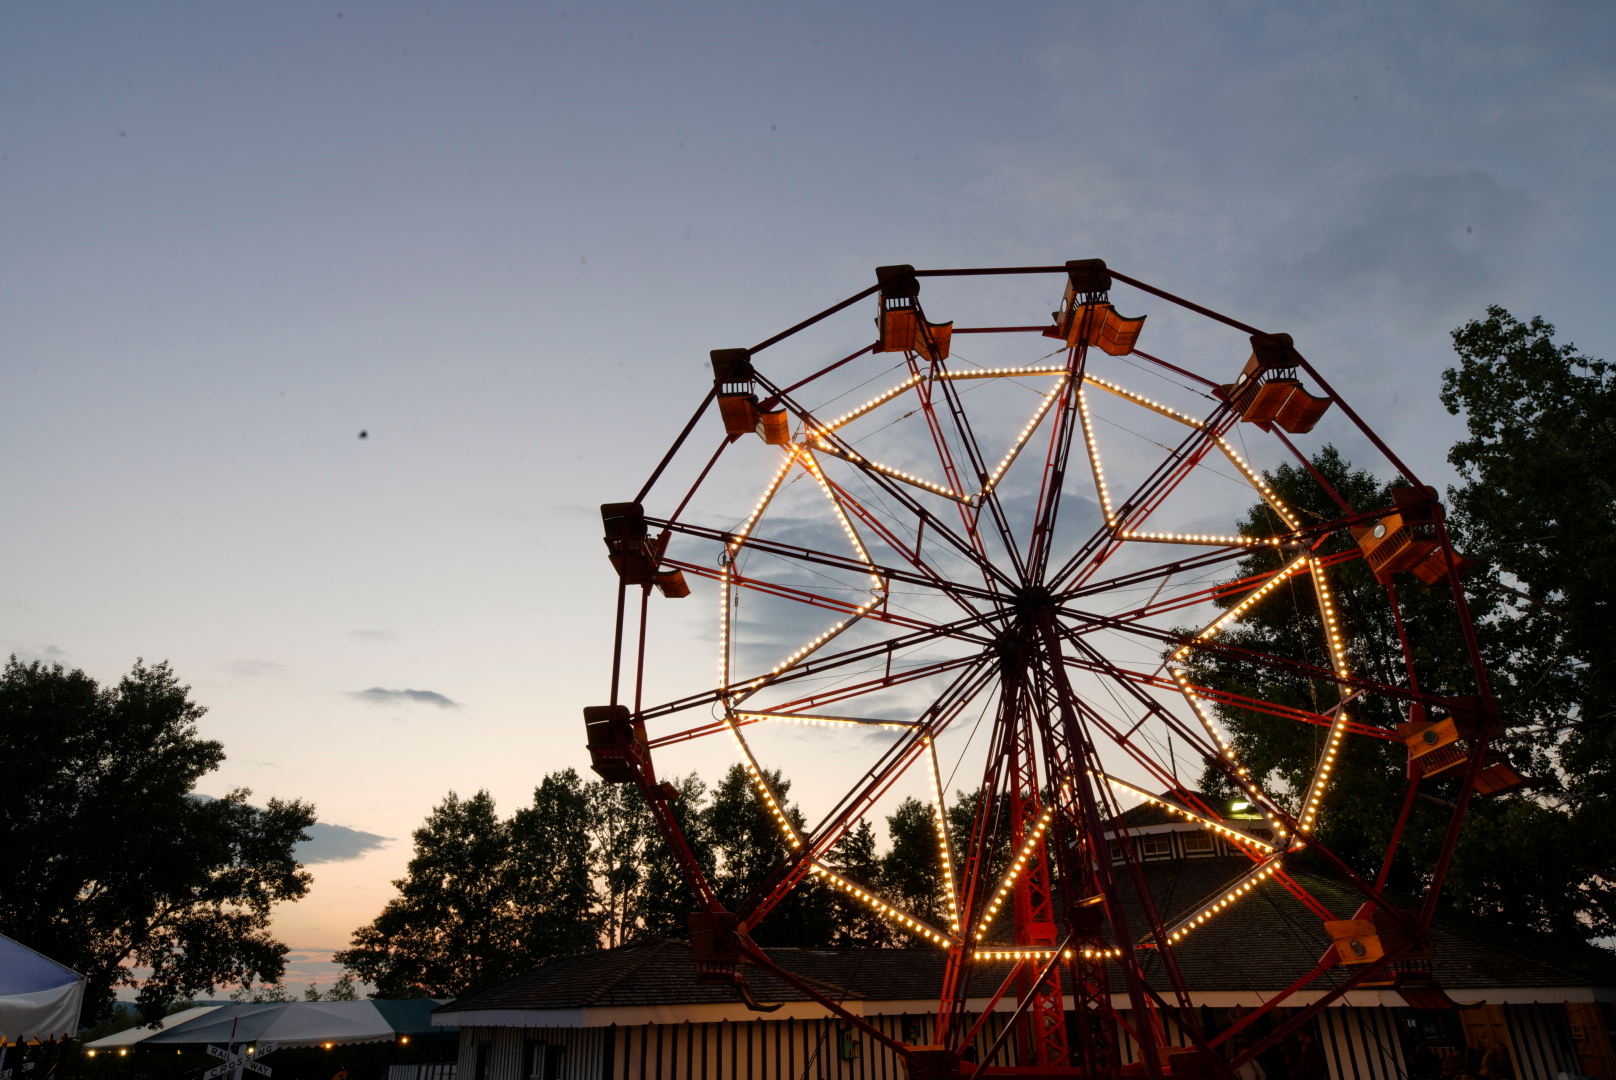 Antique Midway add-on for Stampede Party at Heritage Park in Calgary